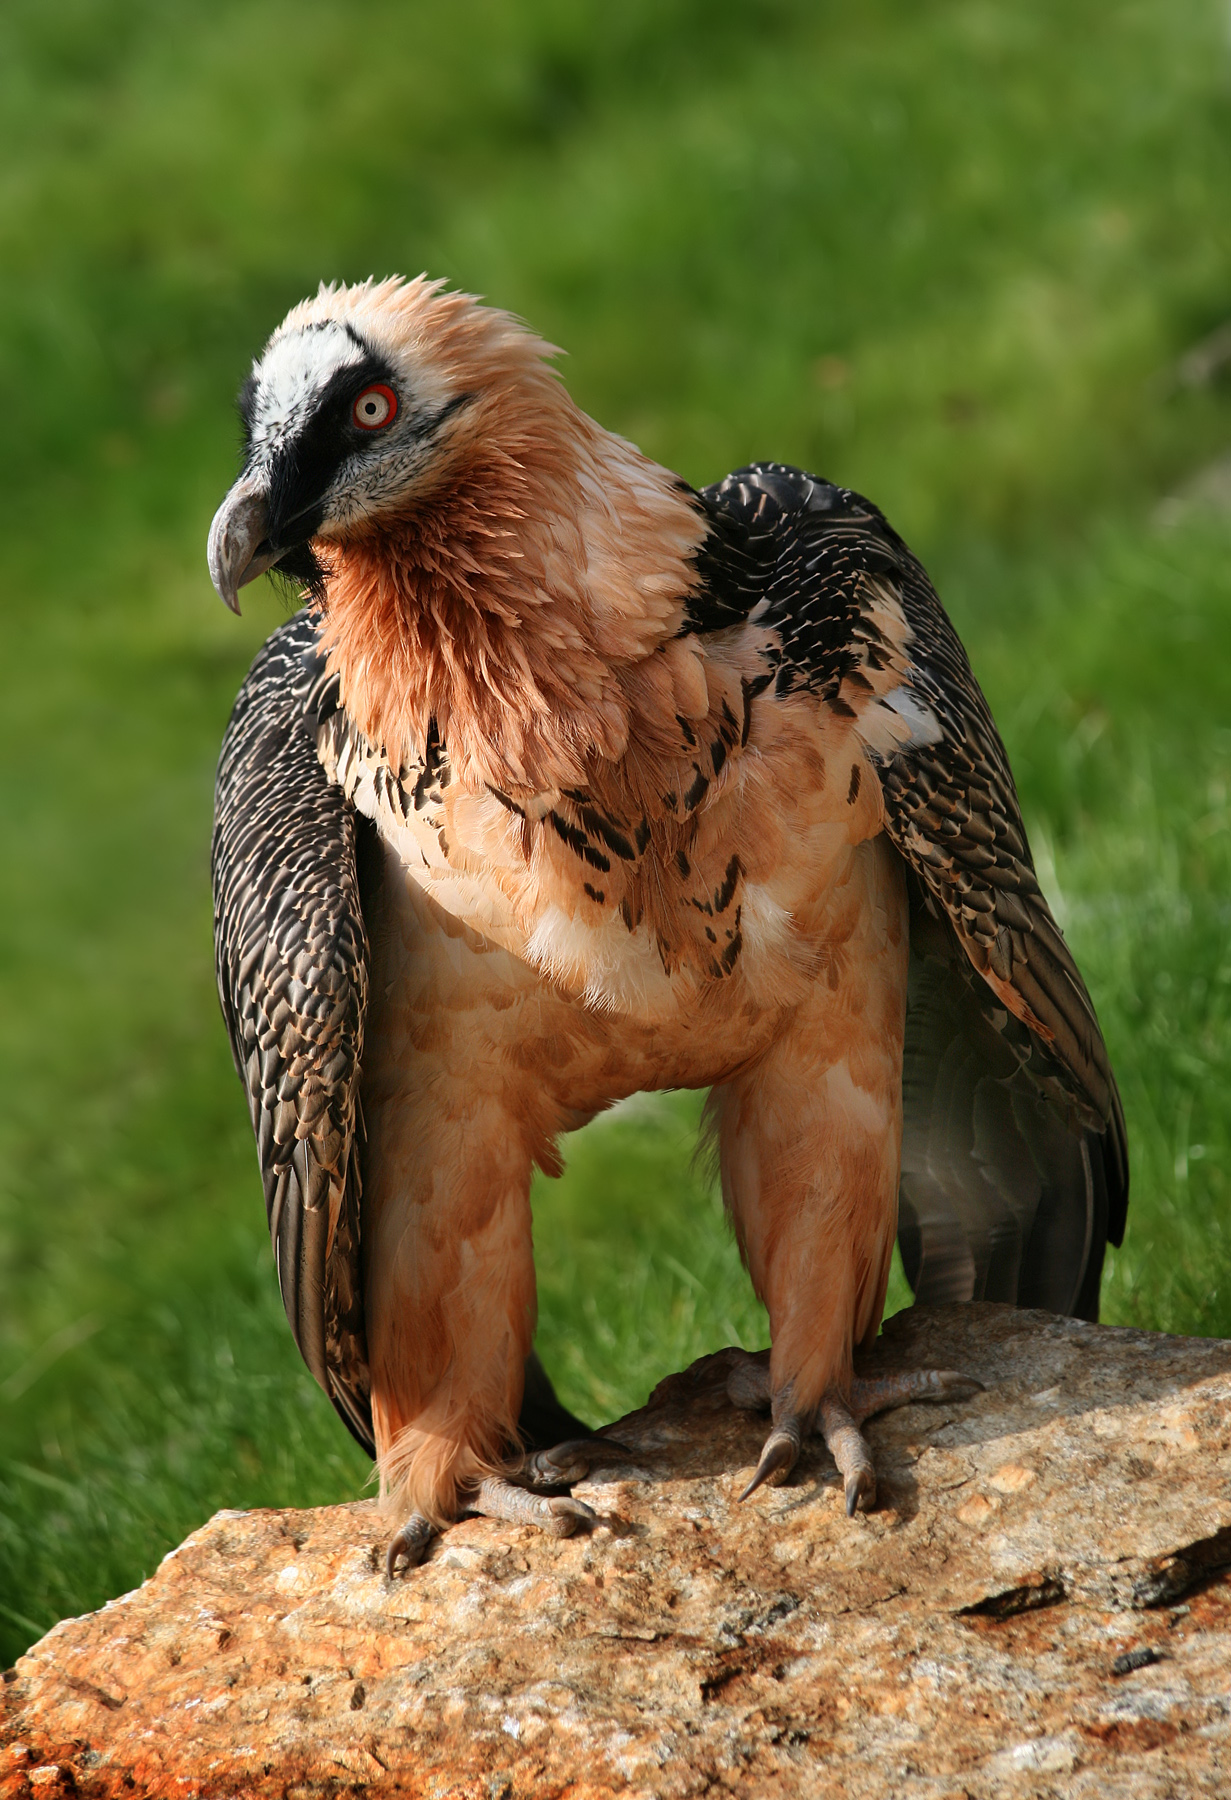 What do vultures do with the bones?